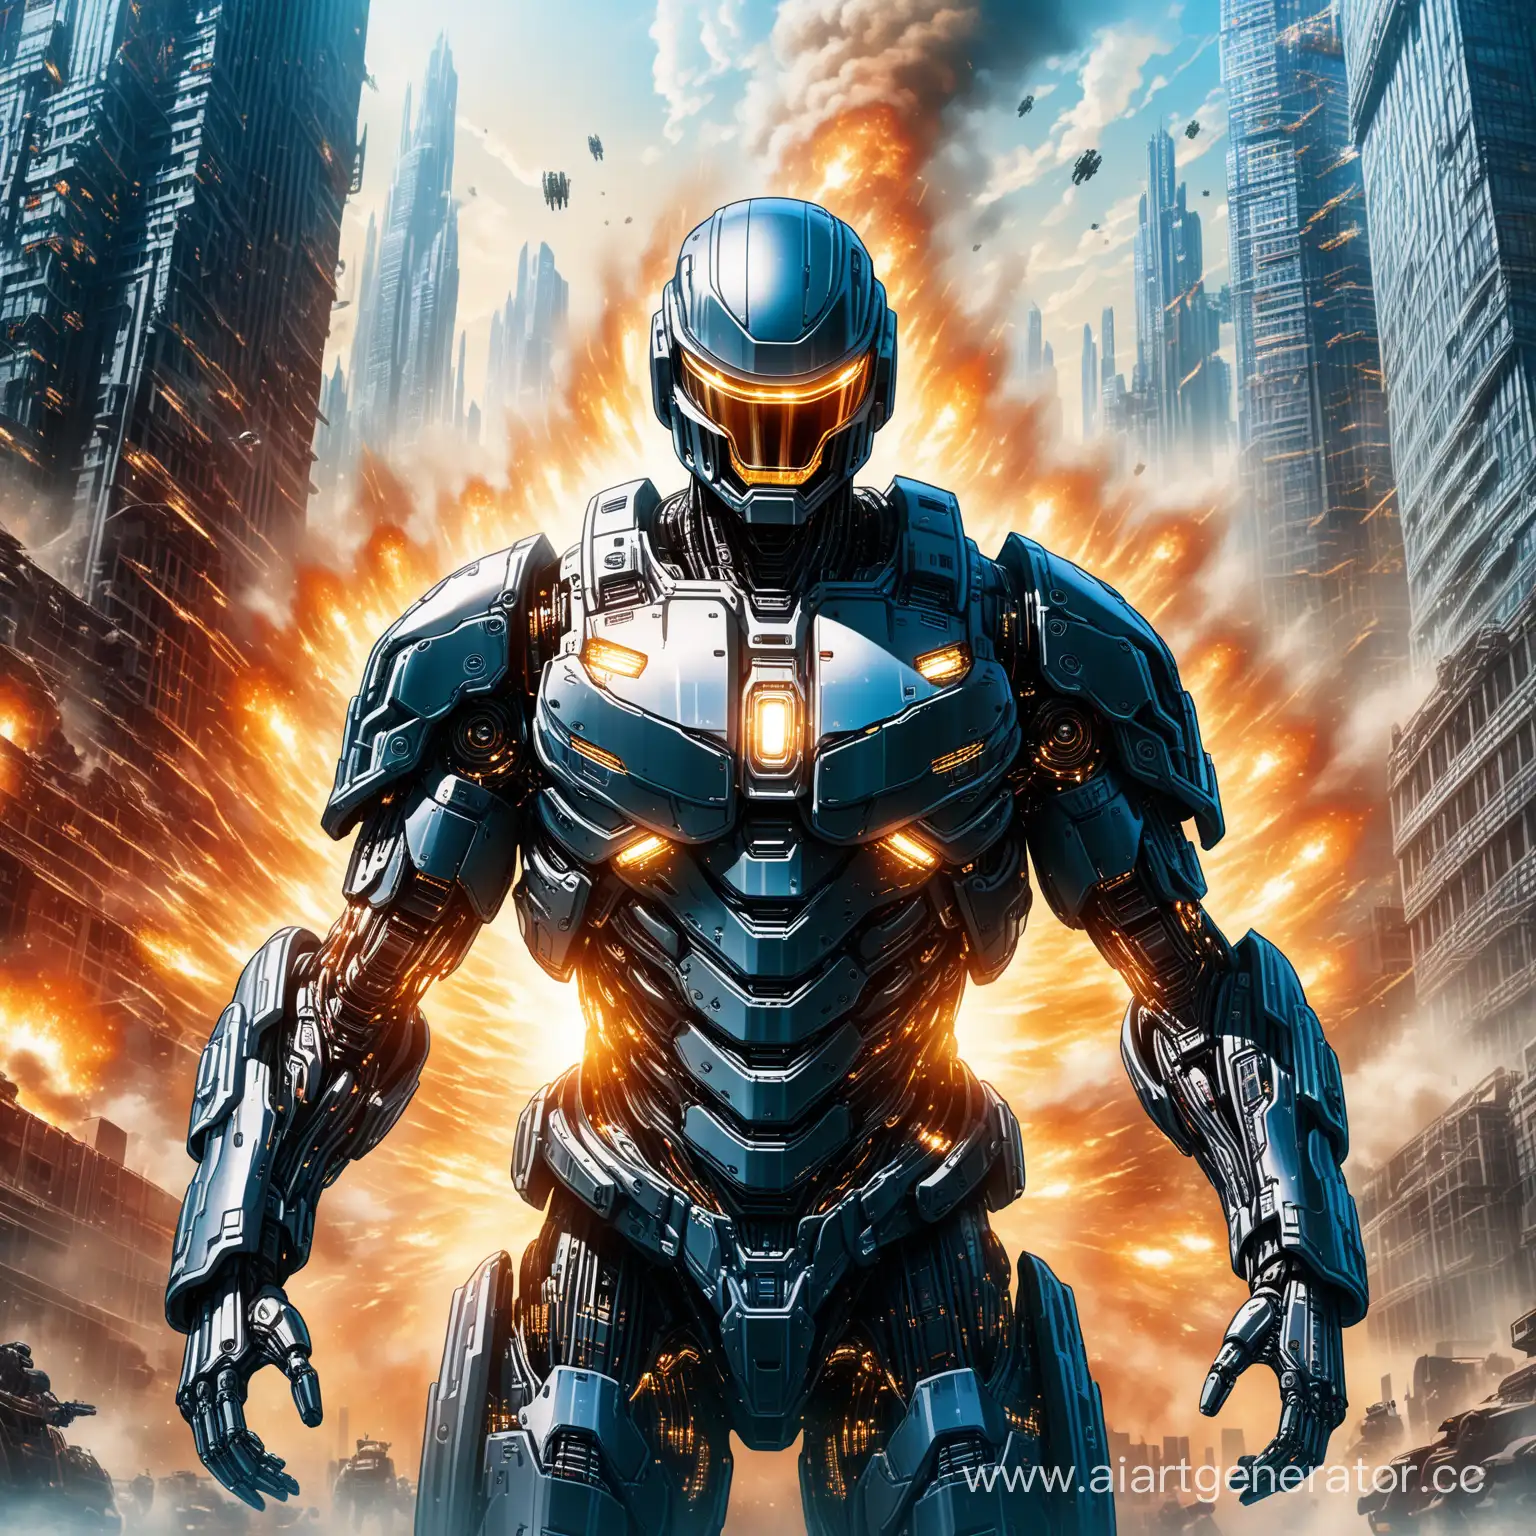 Powerful-Cybernetic-Suit-of-Robocop-in-Halo-Style-Amidst-Urban-Chaos